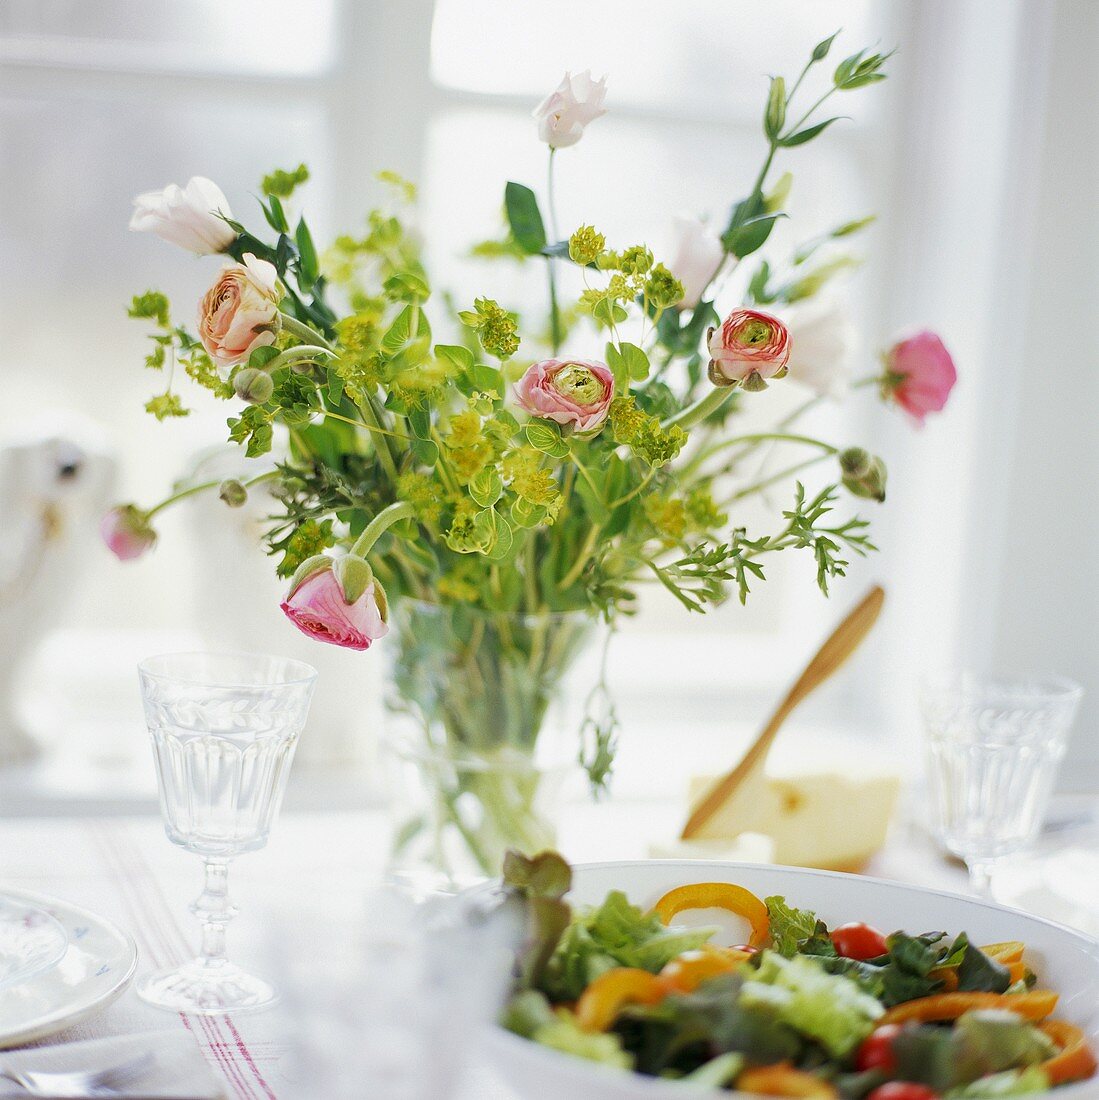 Flowers and bowl of salad on laid table